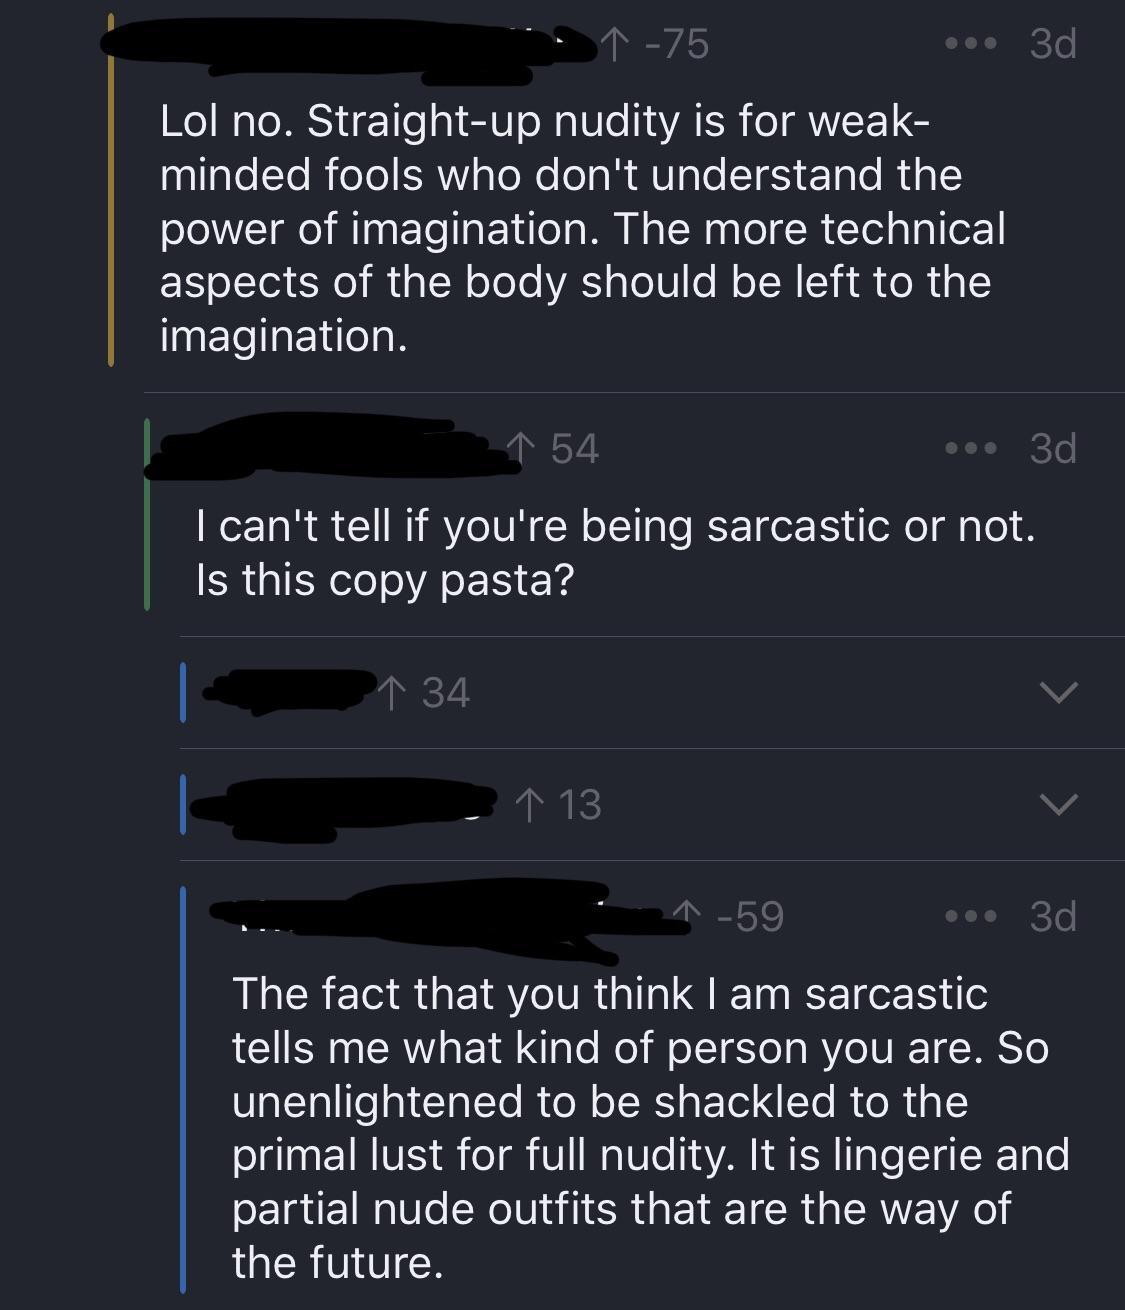 screenshot - 175 ... 3d Lol no. Straightup nudity is for weak minded fools who don't understand the power of imagination. The more technical aspects of the body should be left to the imagination. 54 ... 3d I can't tell if you're being sarcastic or not. 'I